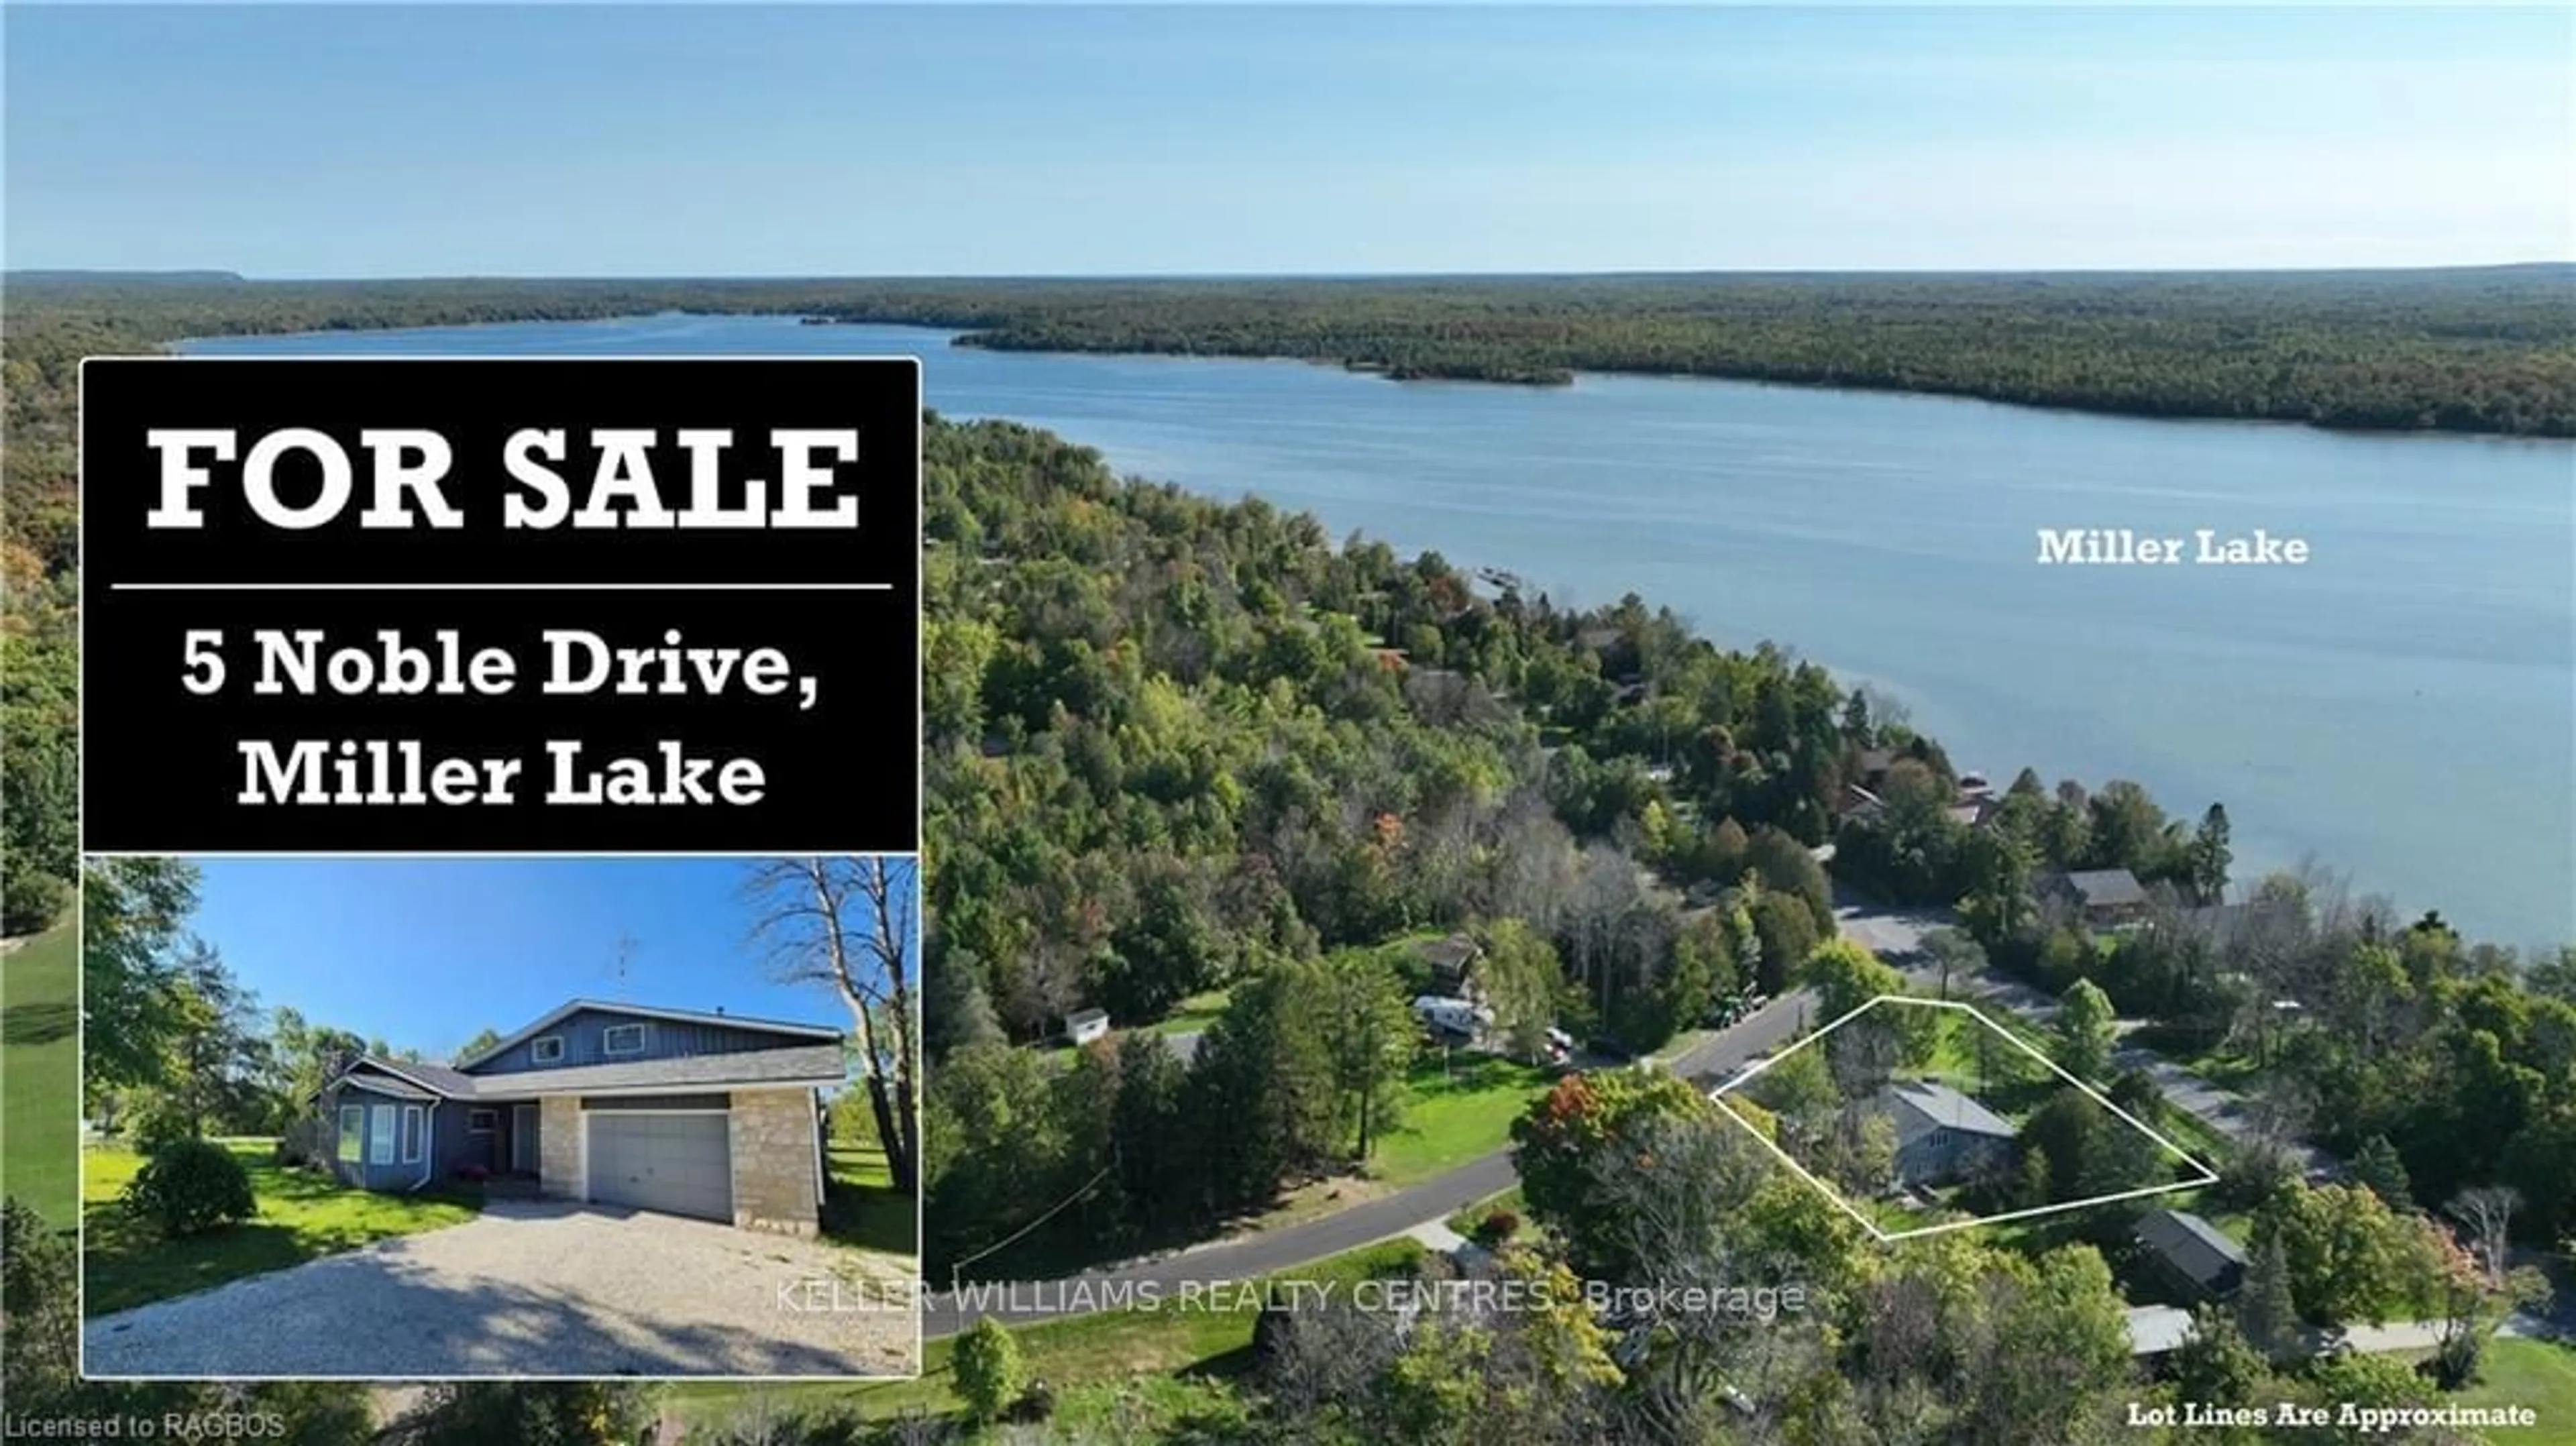 Lakeview for 5 Noble Dr, Northern Bruce Peninsula Ontario N0H 1Z0